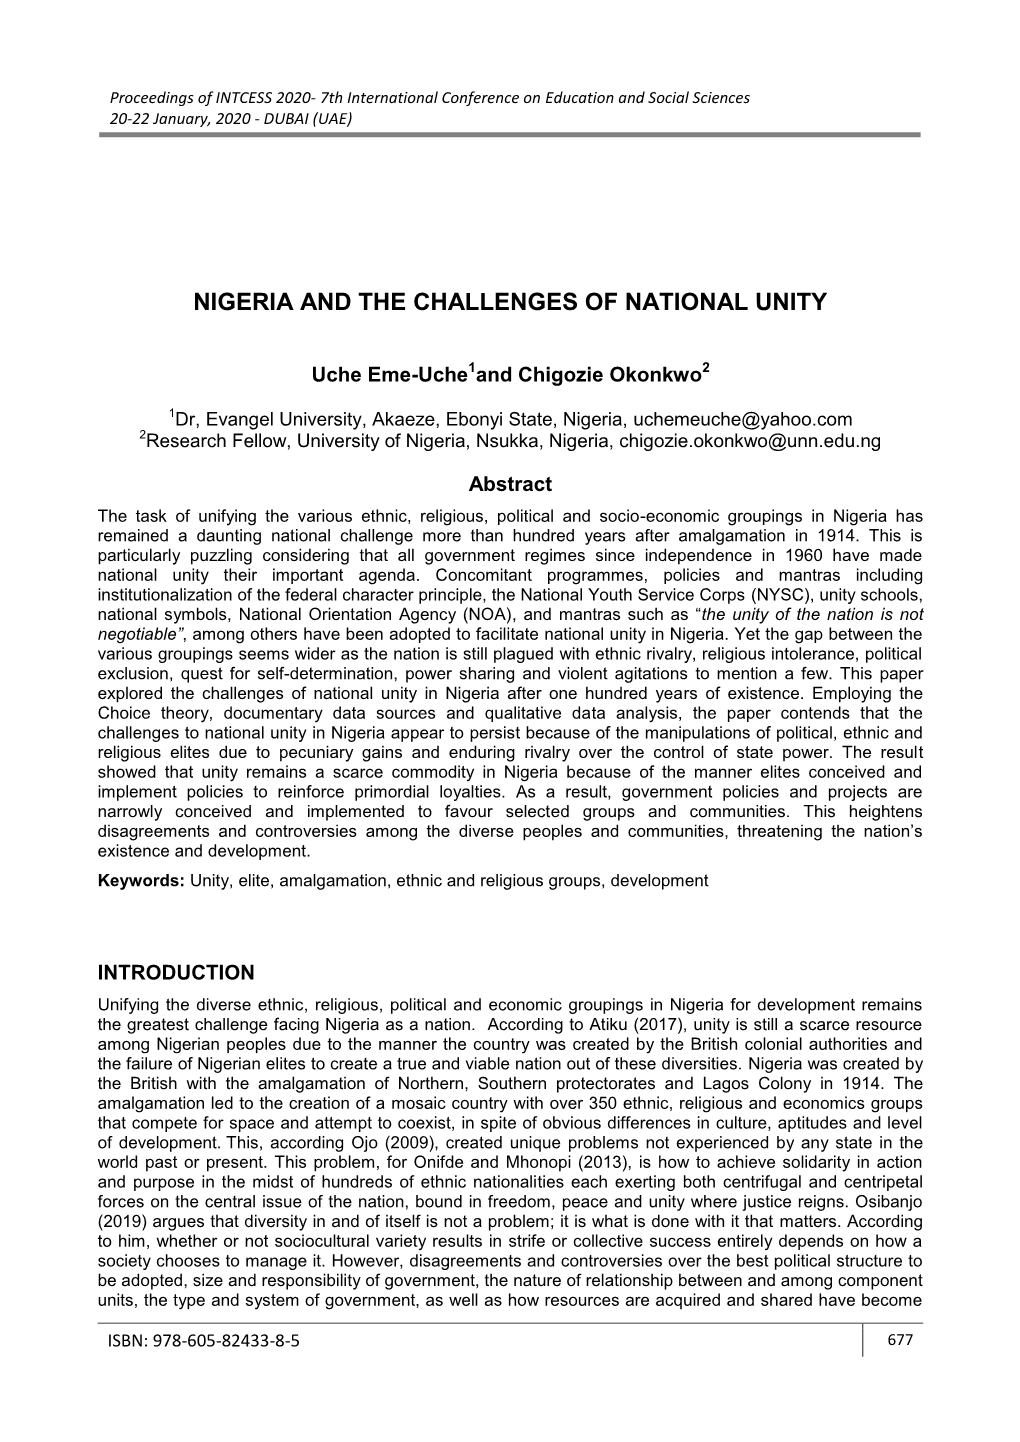 Nigeria and the Challenges of National Unity